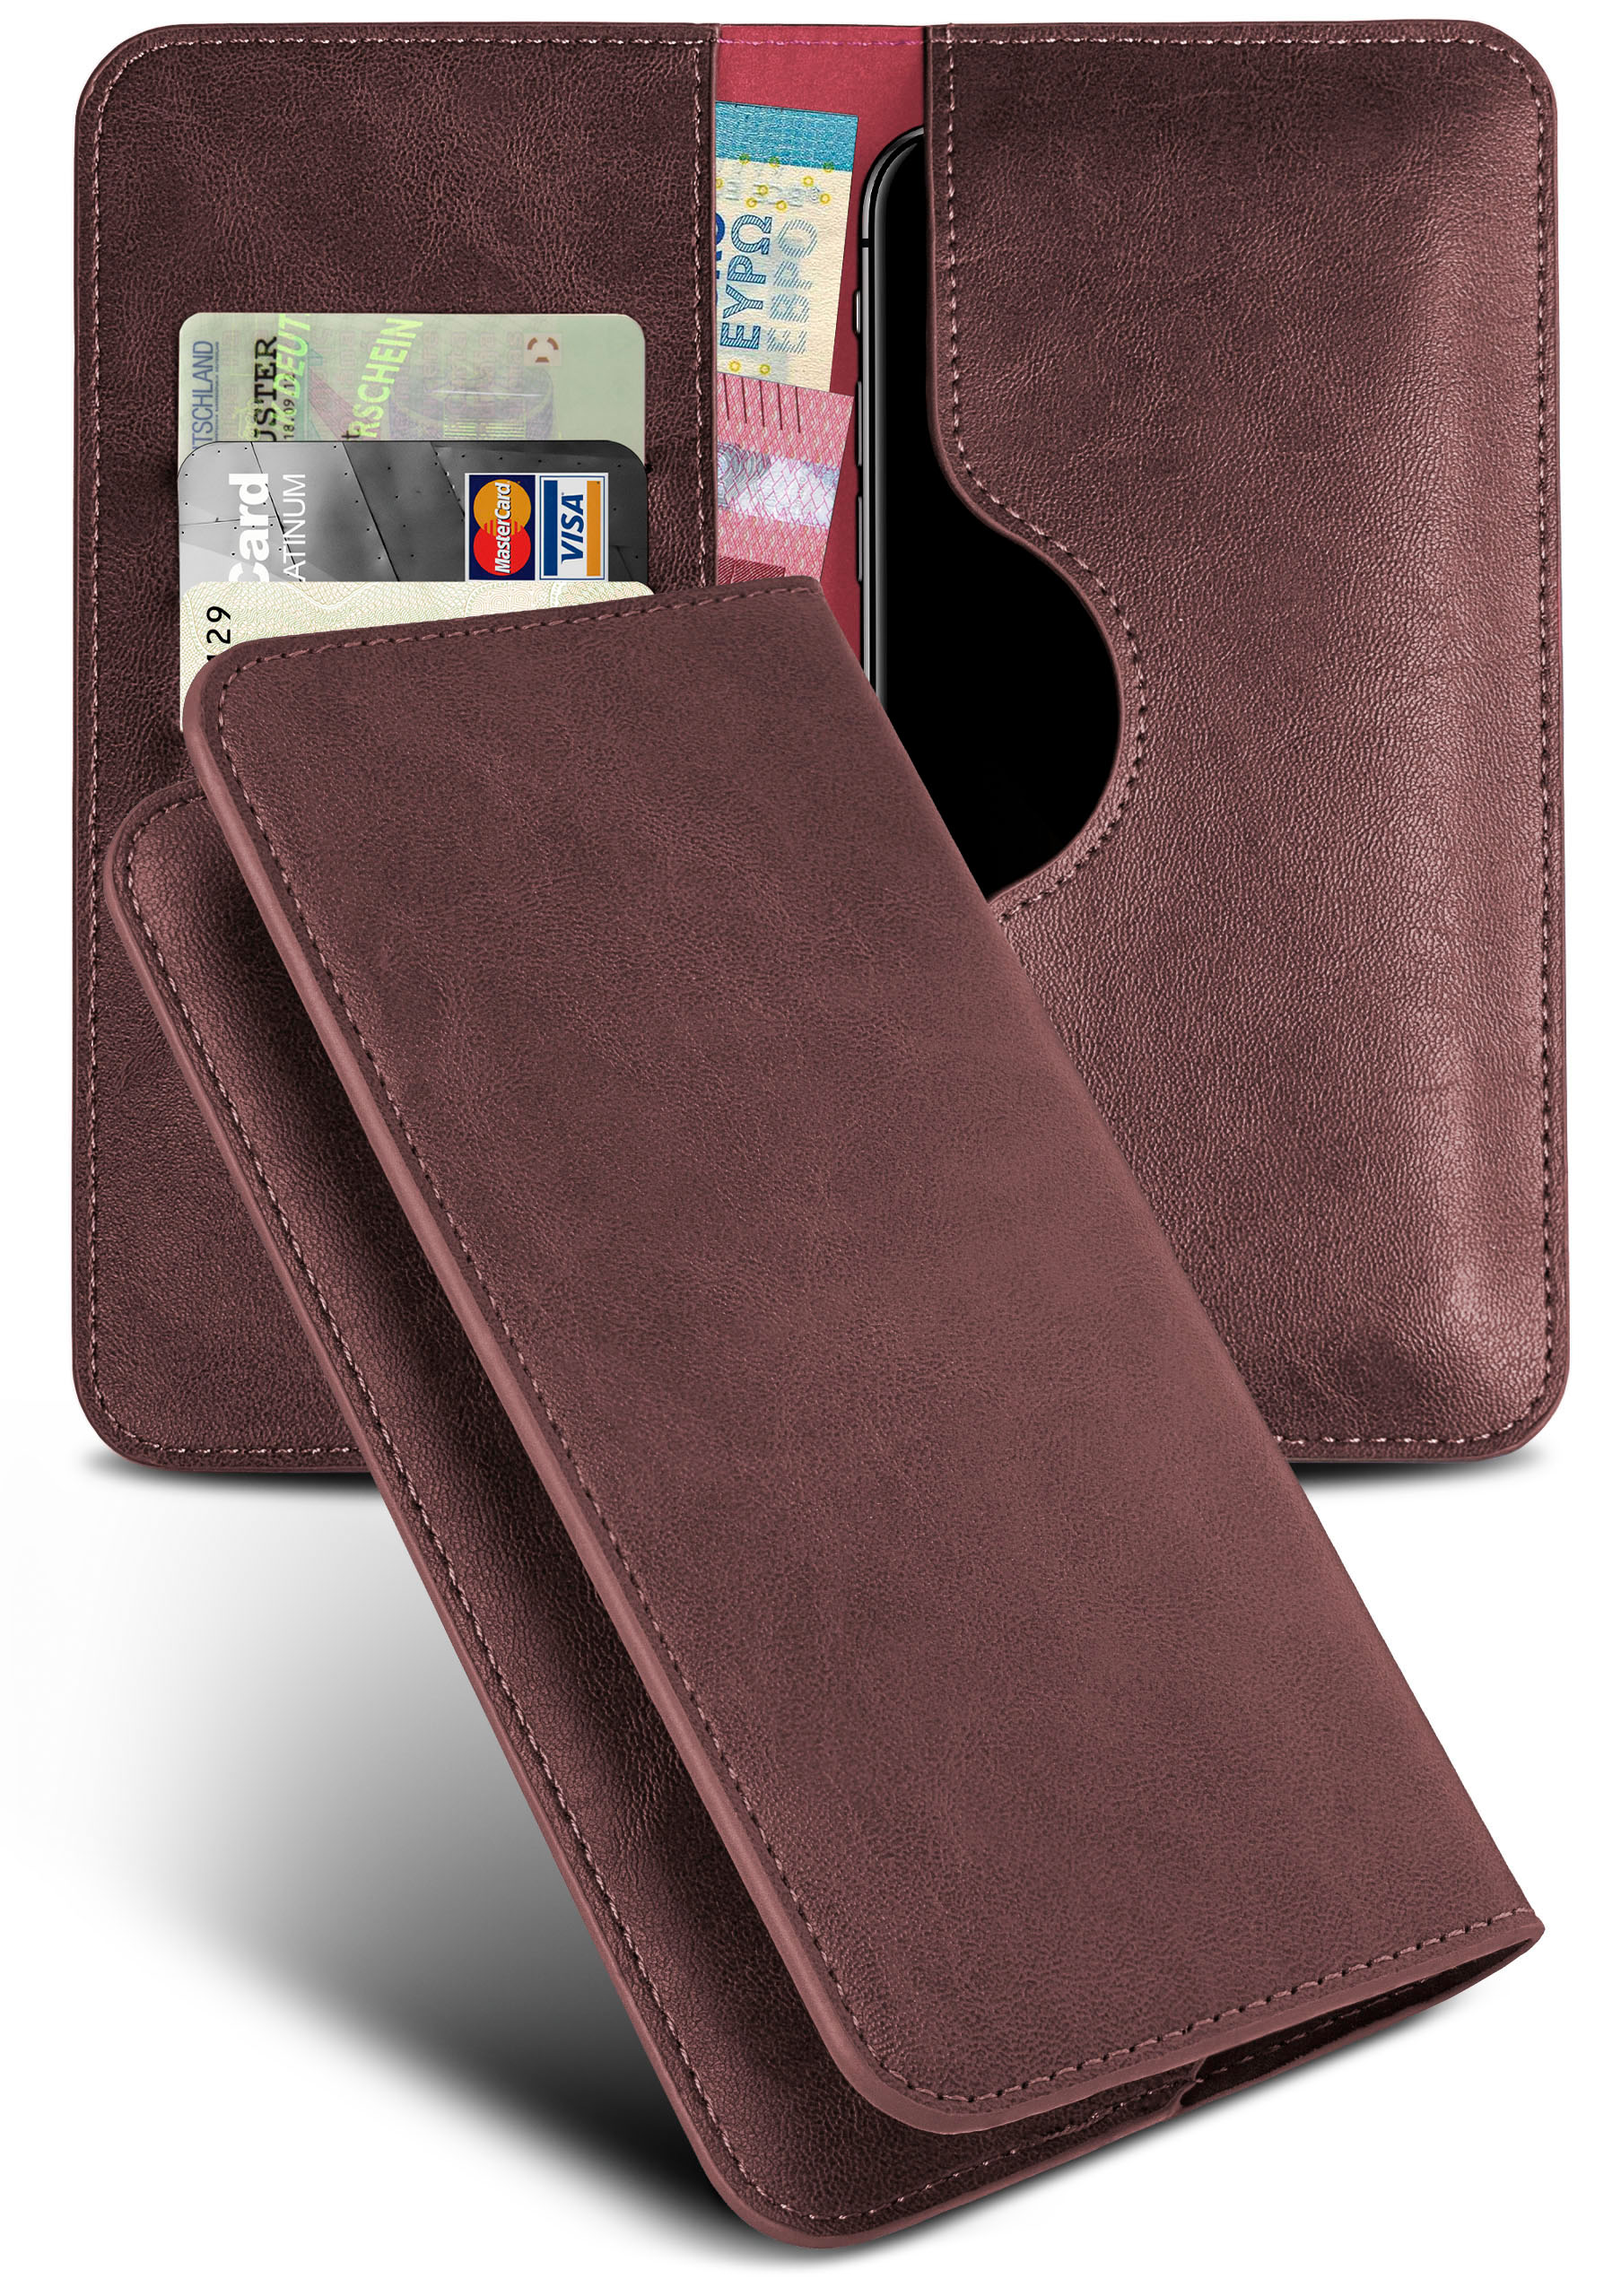 Cover, Sony, Flip Case, Purse Xperia Weinrot XZ1 Compact, MOEX